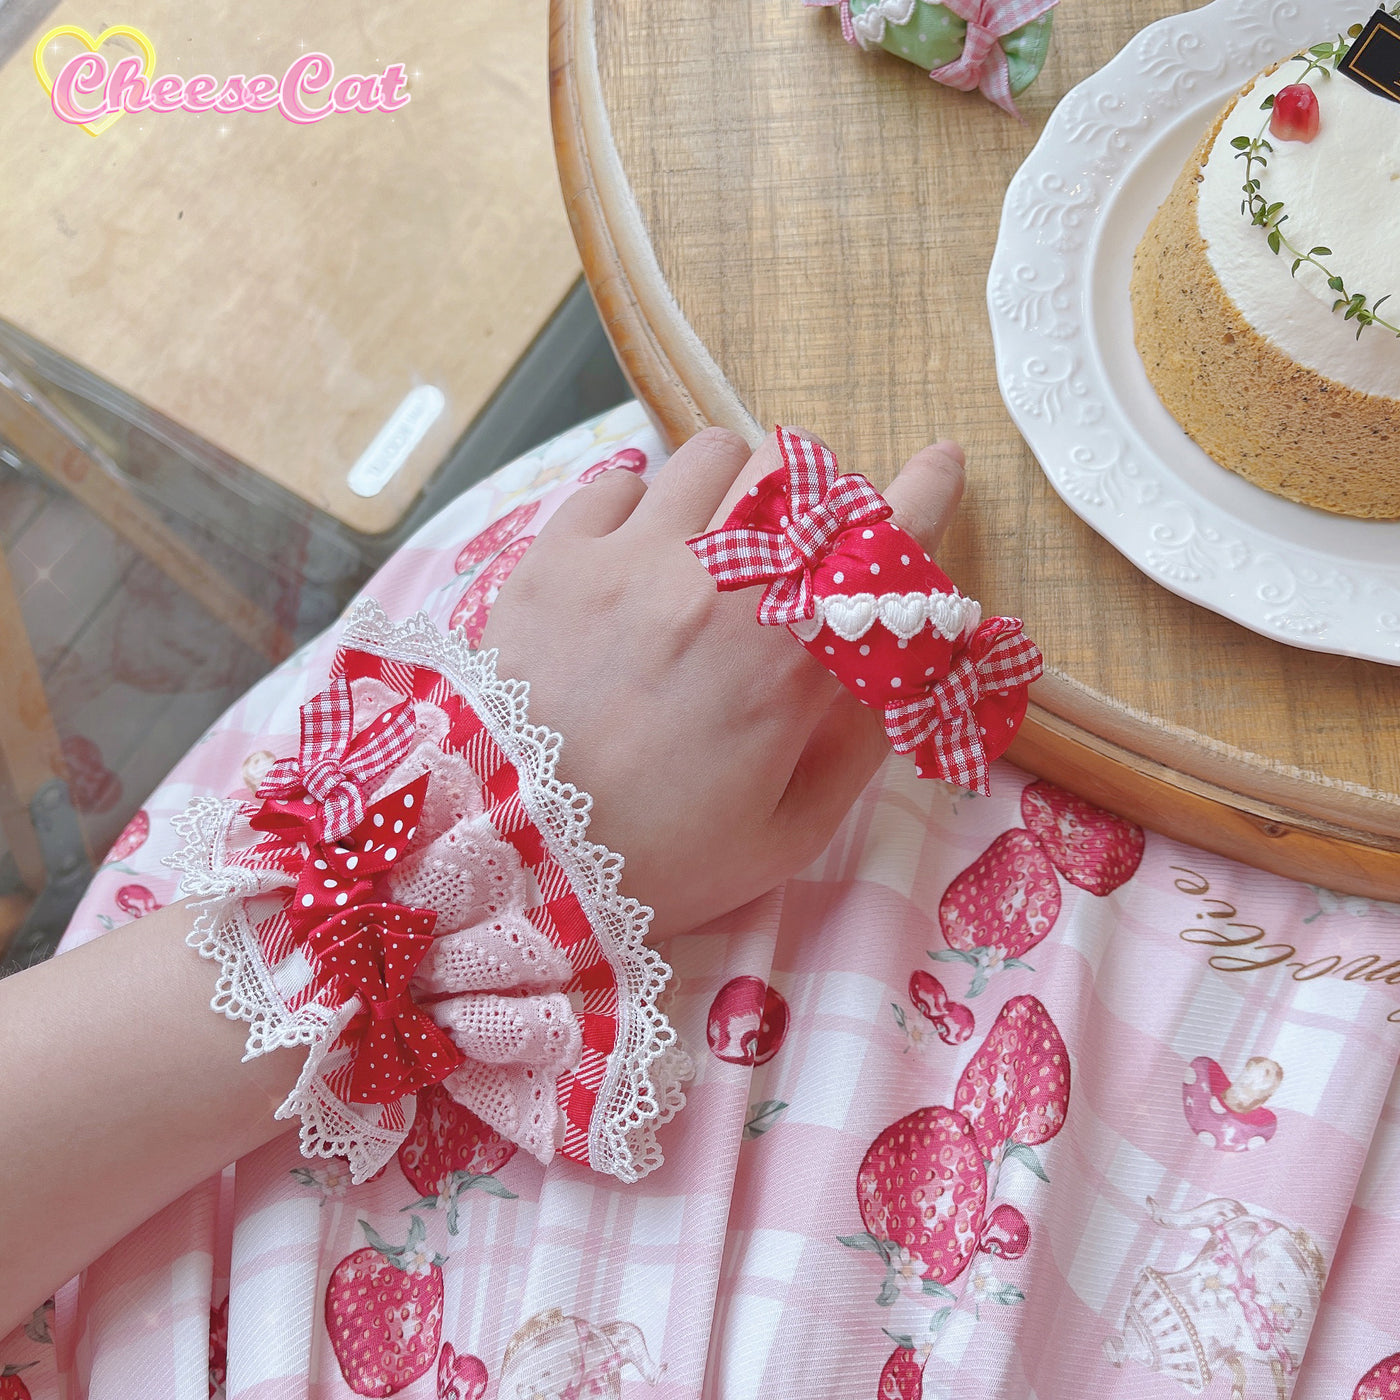 (Buyforme)CheeseCat~Sweet and Playful Strawberry Gingham Lace Cuffs   